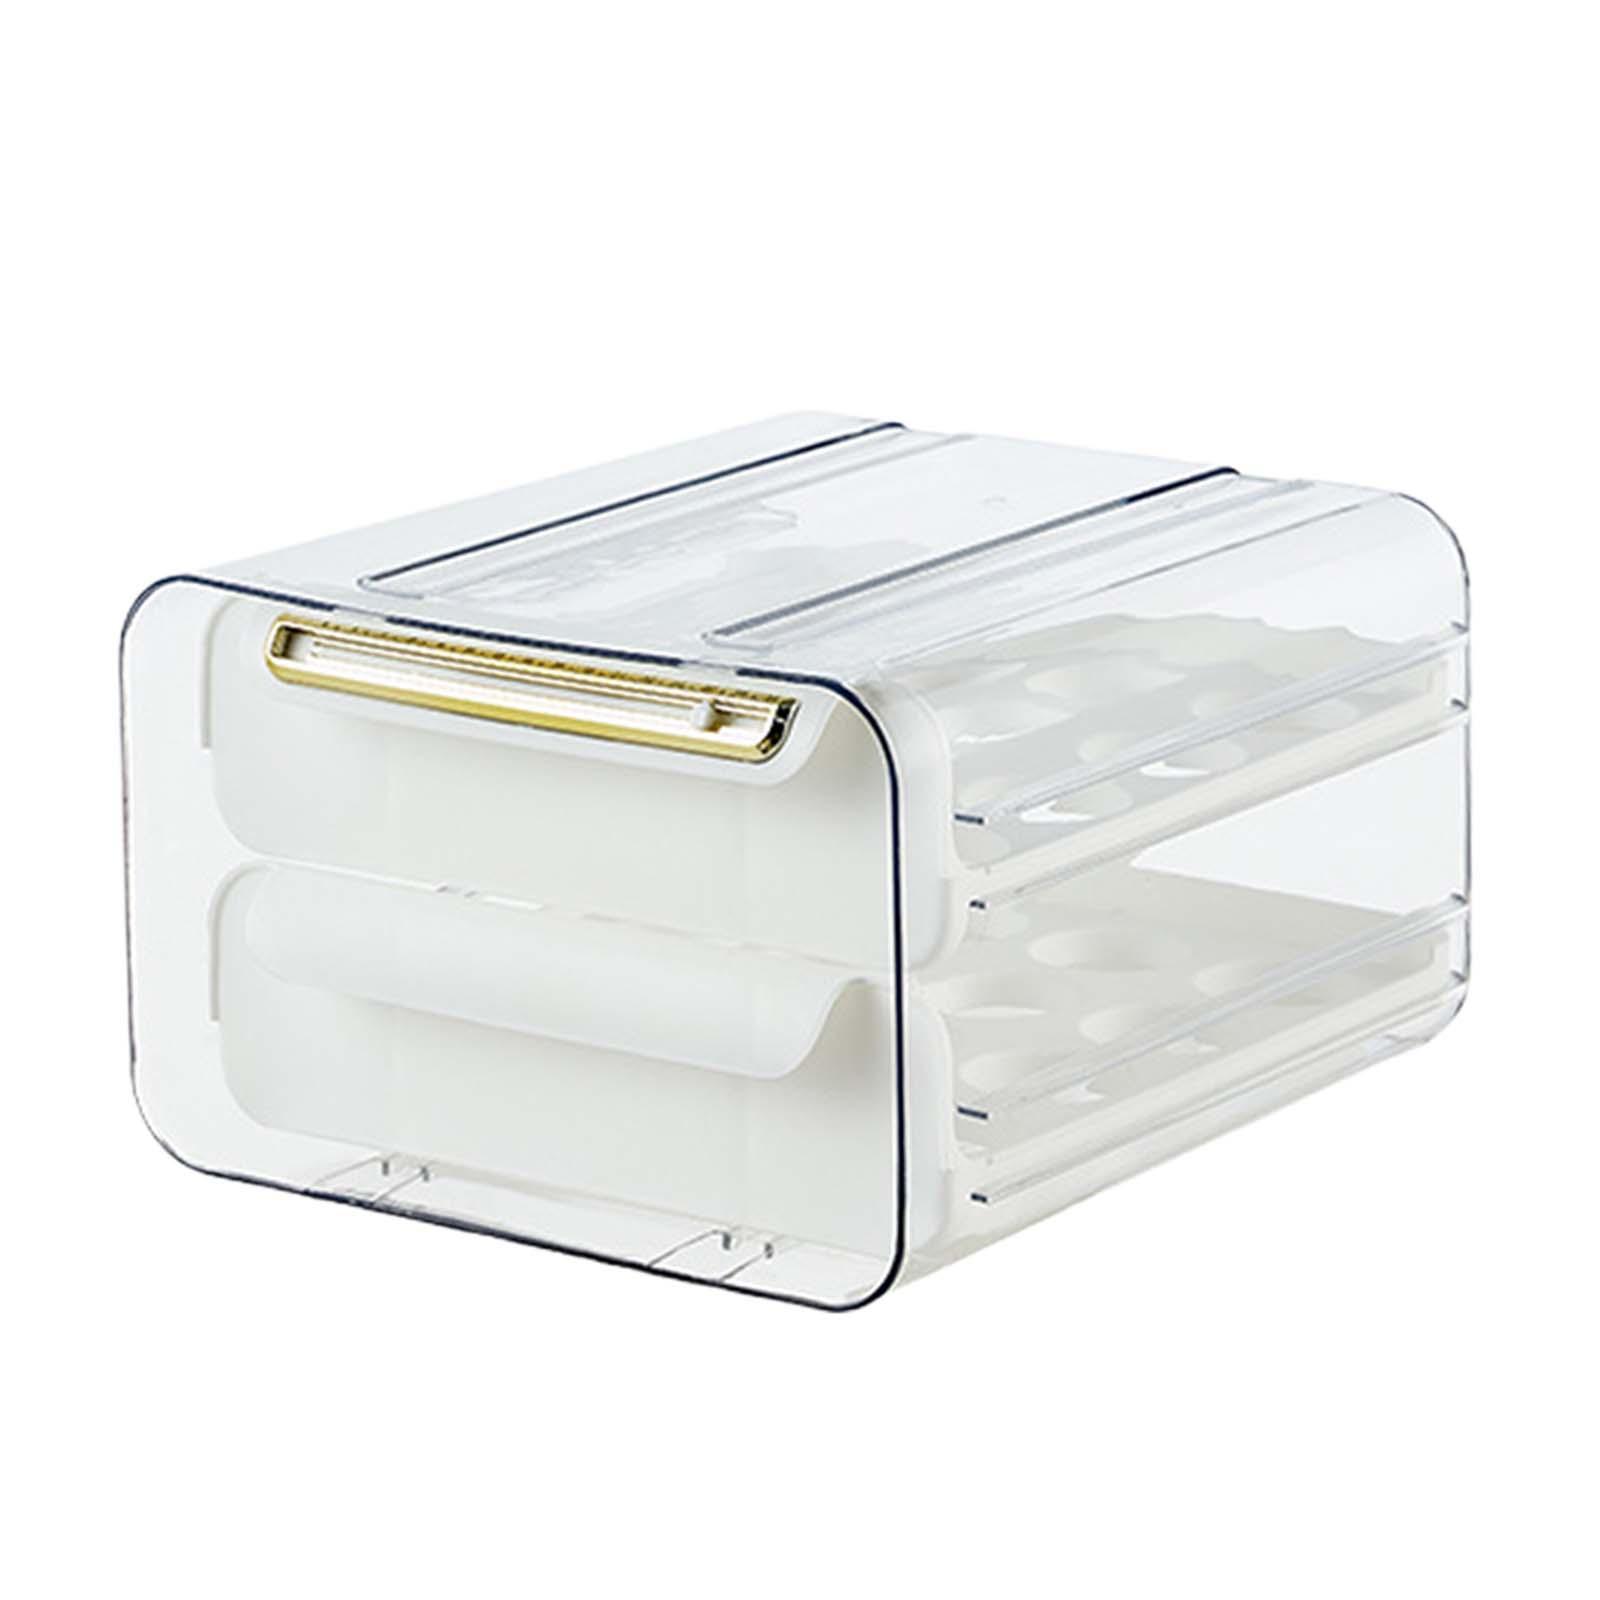 Egg Container Fridge Egg Tray Egg Storage Box Sturdy Space Saving for Pantry